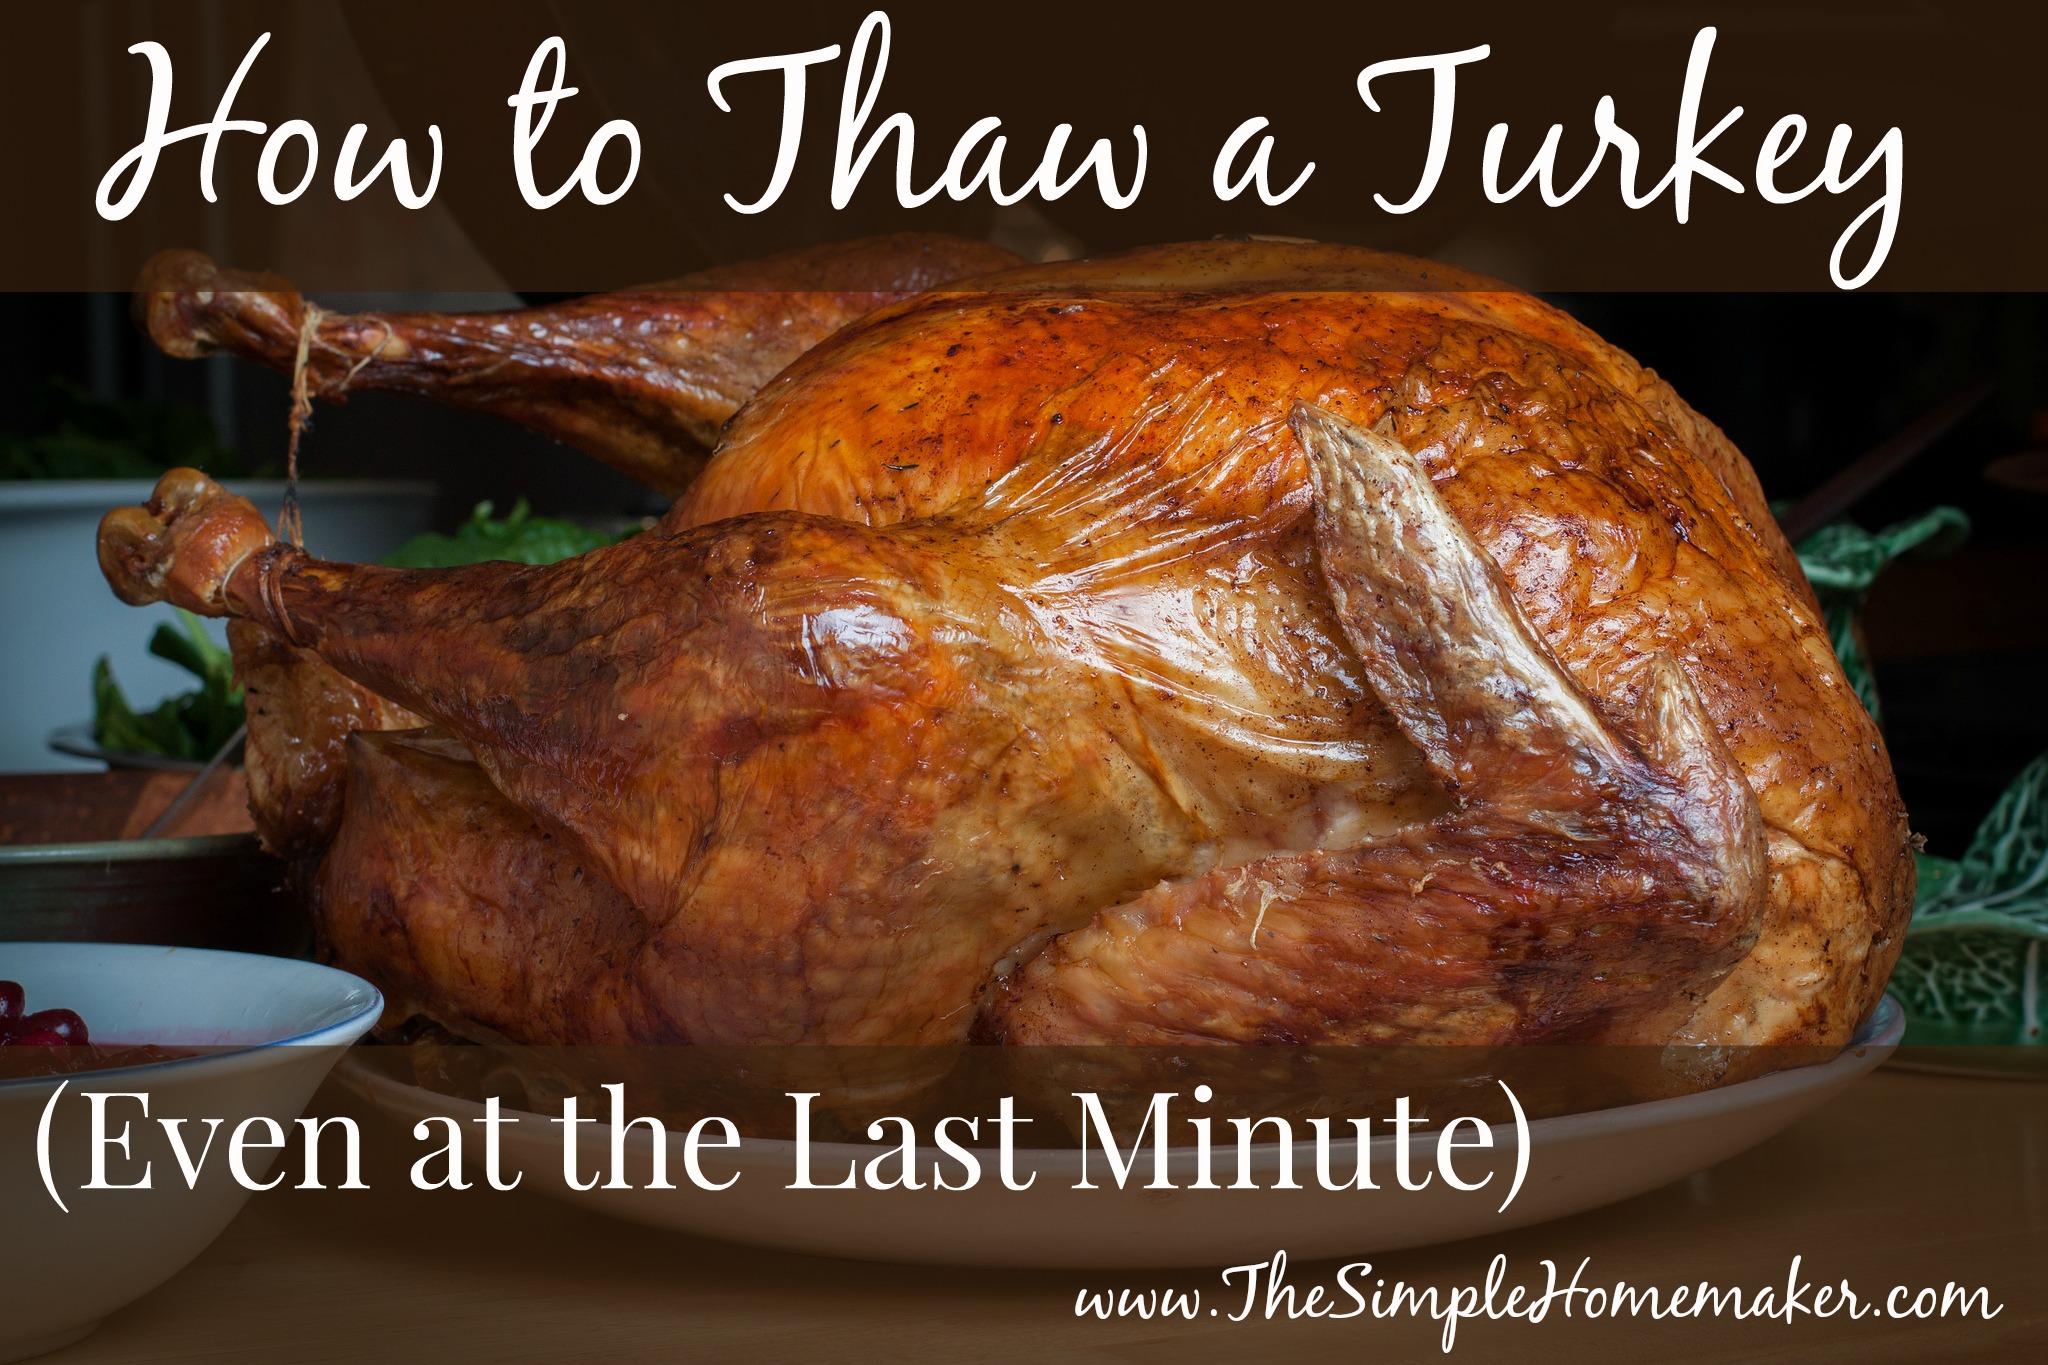 How To Thaw a Turkey (Even at the Last Minute)